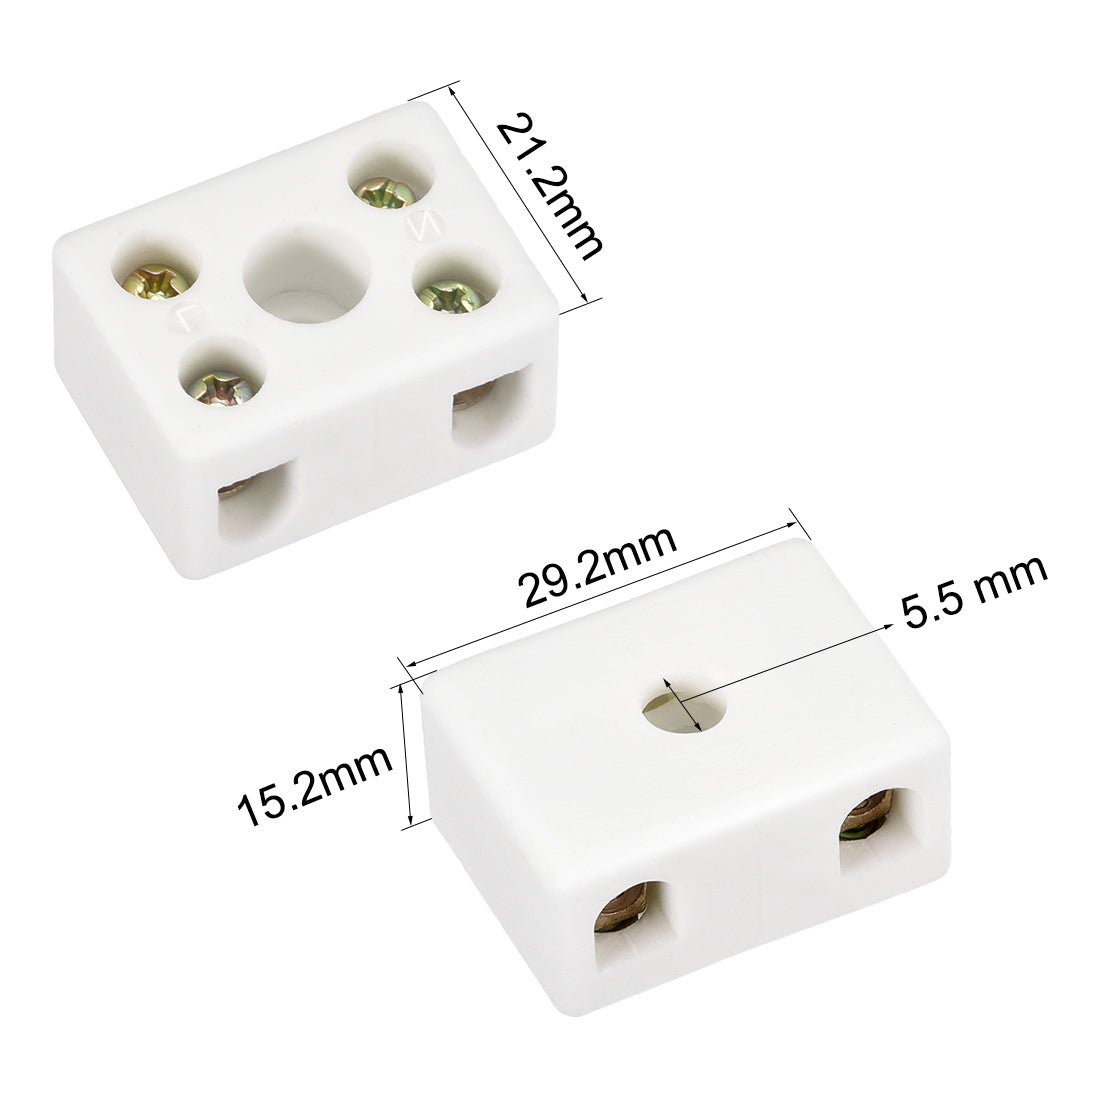 uxcell Uxcell 2 Way Ceramics Terminal Blocks High Temp Porcelain Ceramic Connectors 29.2x21.2x15.2mm for Electrical Wire Cable 5 Pcs